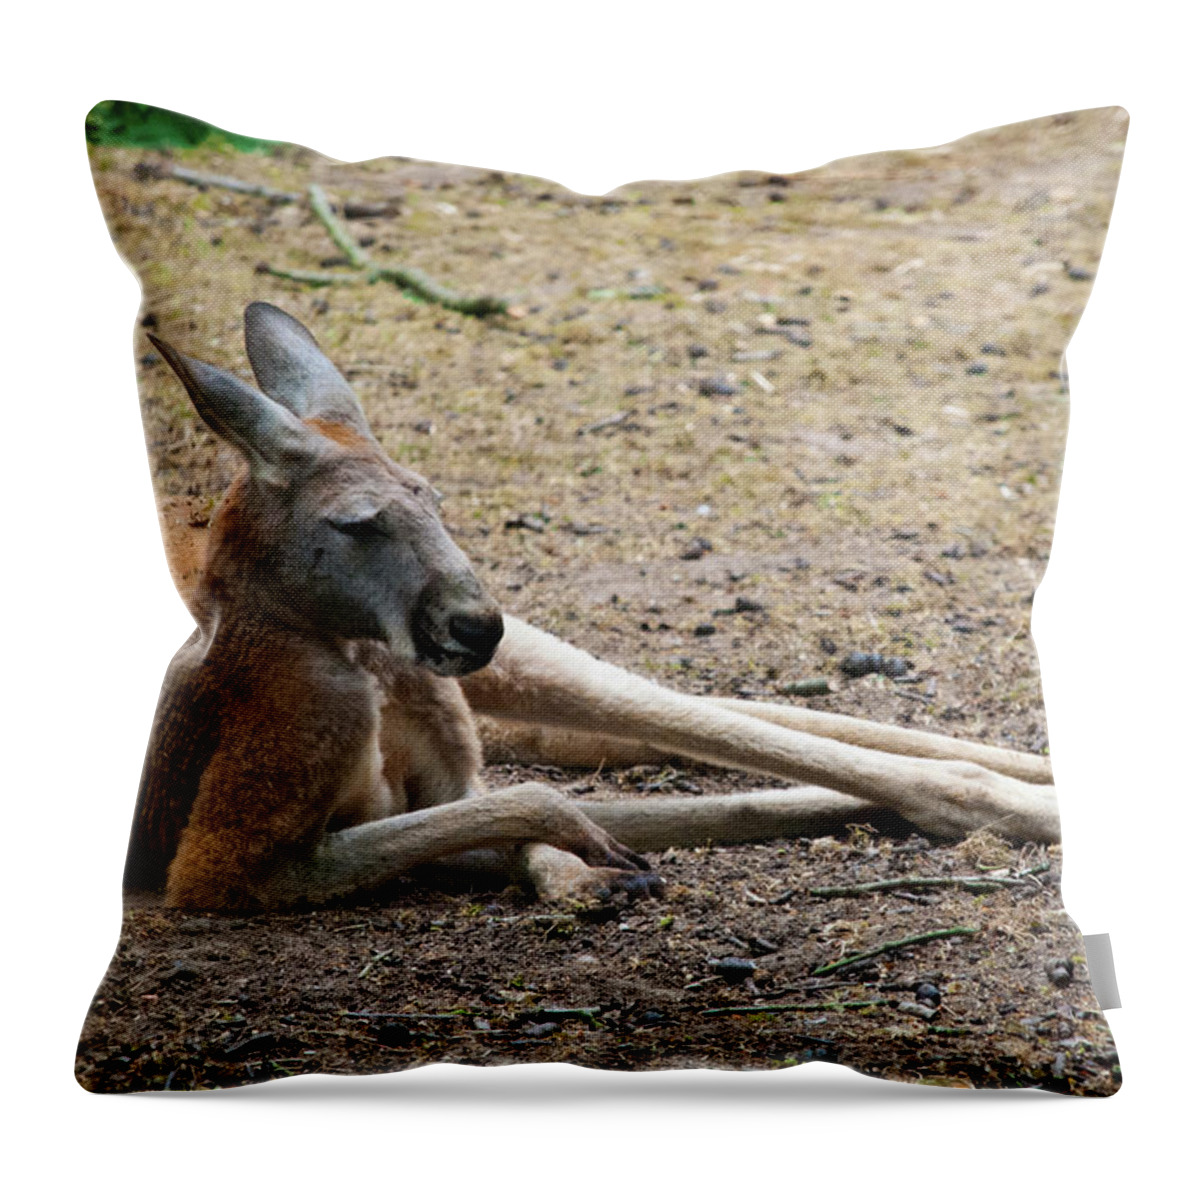 Animal Themes Throw Pillow featuring the photograph Kangaroo by Elizabeth Livermore